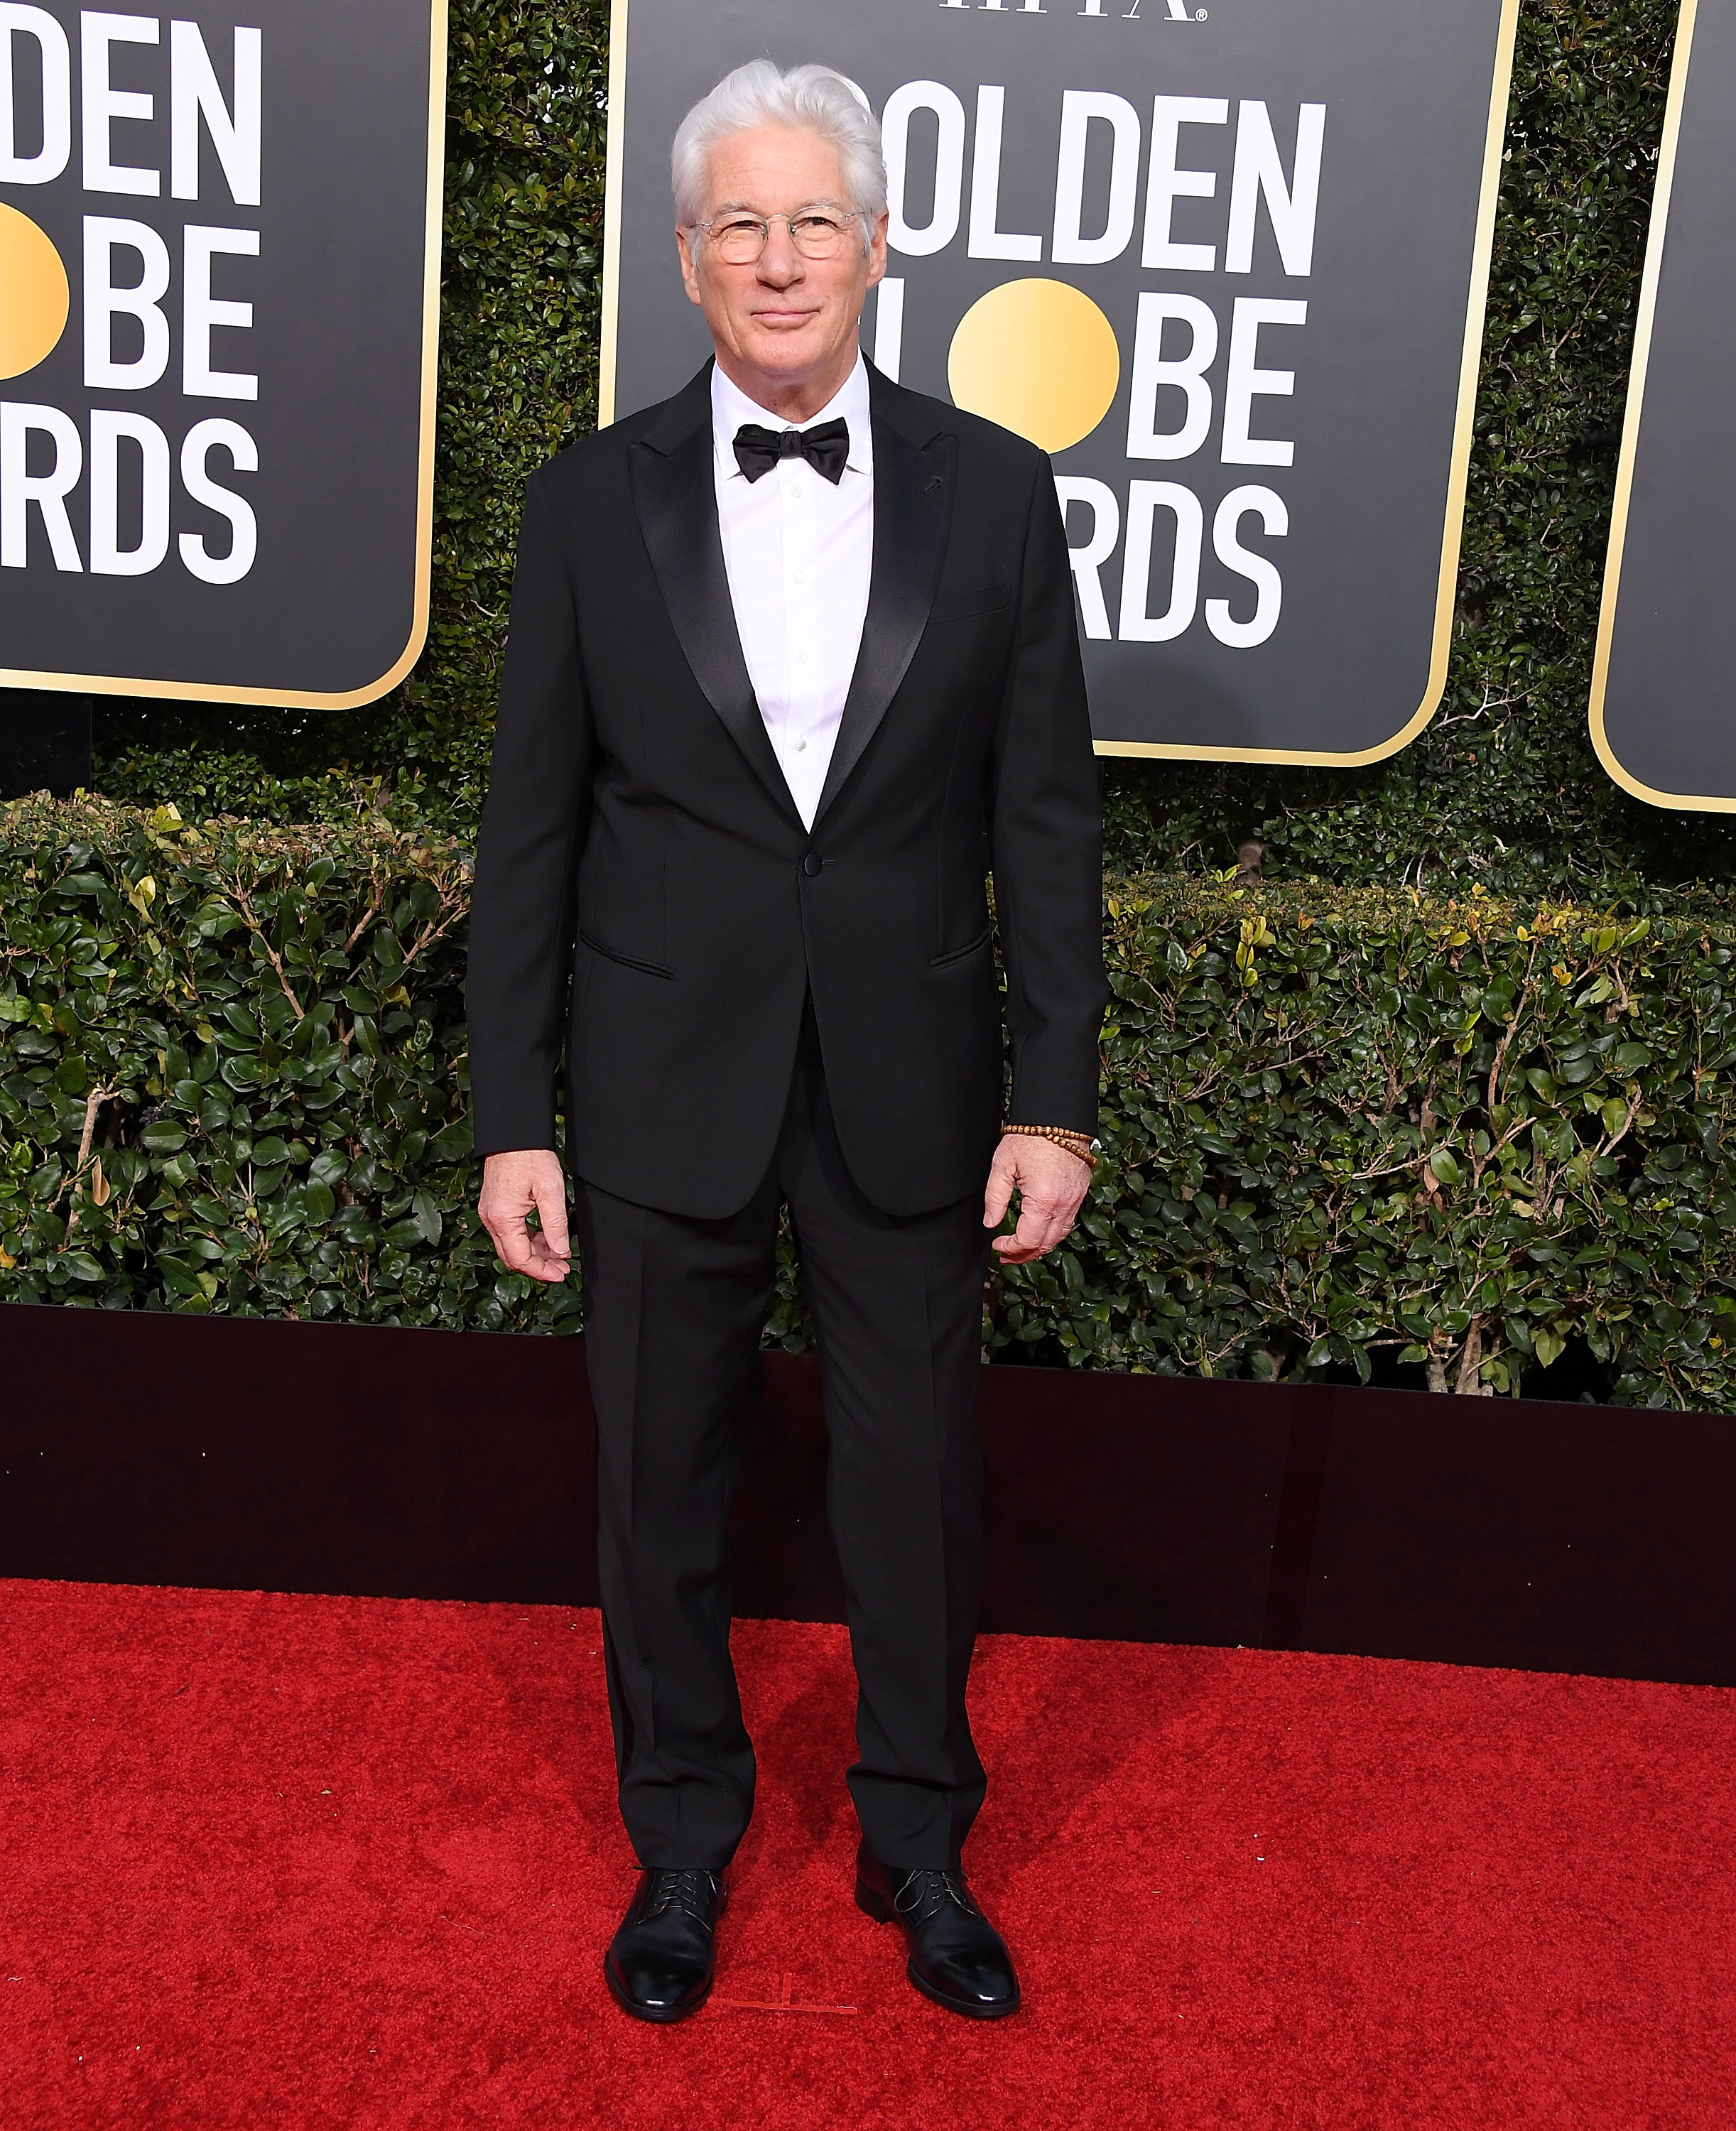 Richard Gere at the 76th Annual Golden Globe Awards in Beverly Hills, California on January 6, 2019. | Source: Getty Images